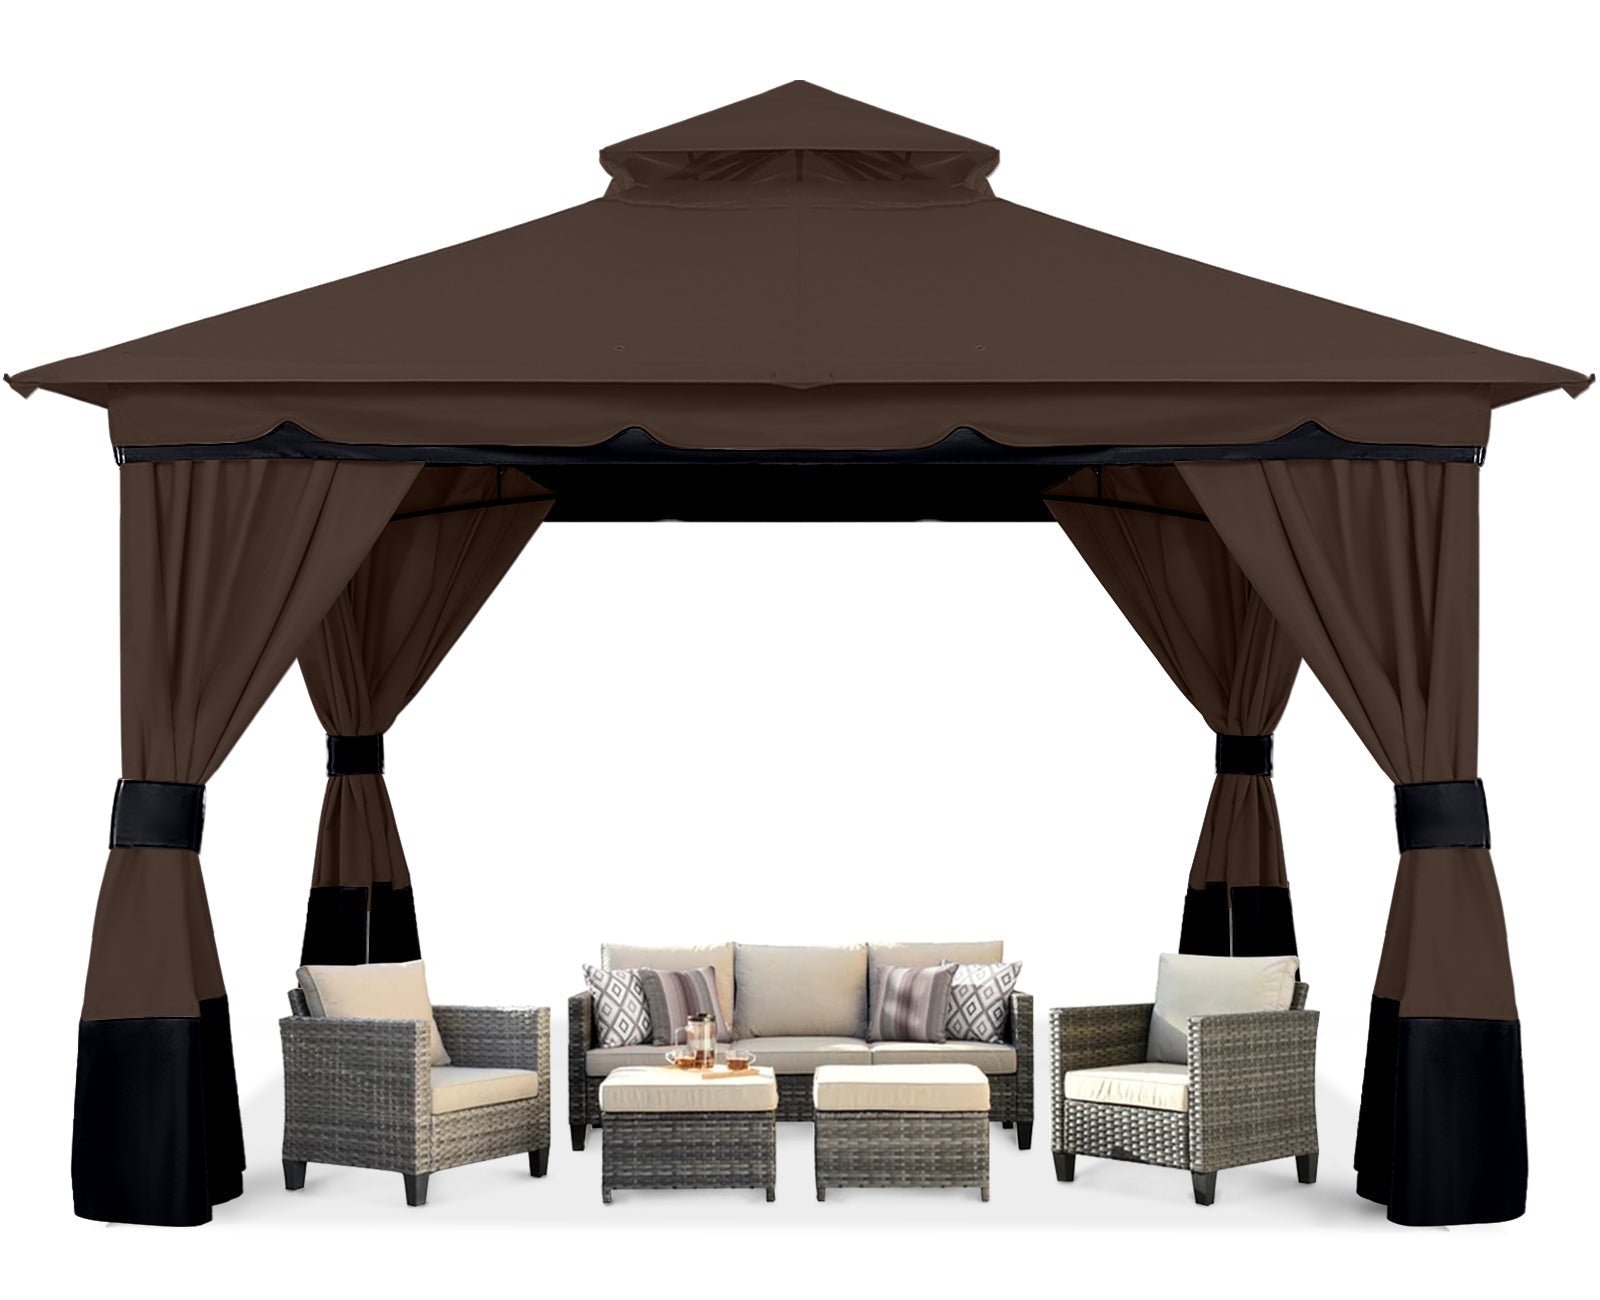 10x12 Outdoor Gazebo, Double Roof Patio Gazebo with Shade Curtains